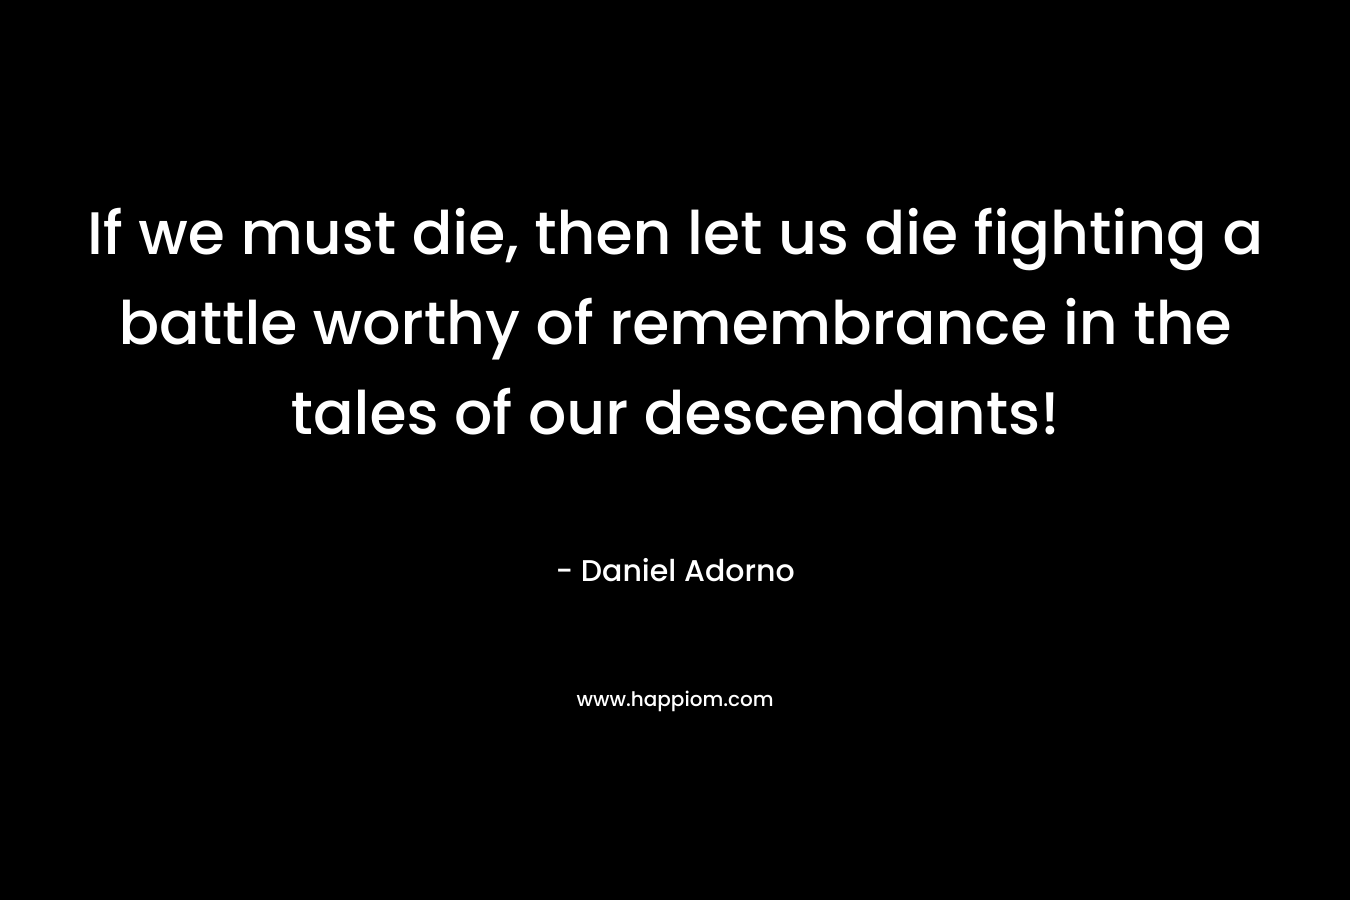 If we must die, then let us die fighting a battle worthy of remembrance in the tales of our descendants! – Daniel Adorno